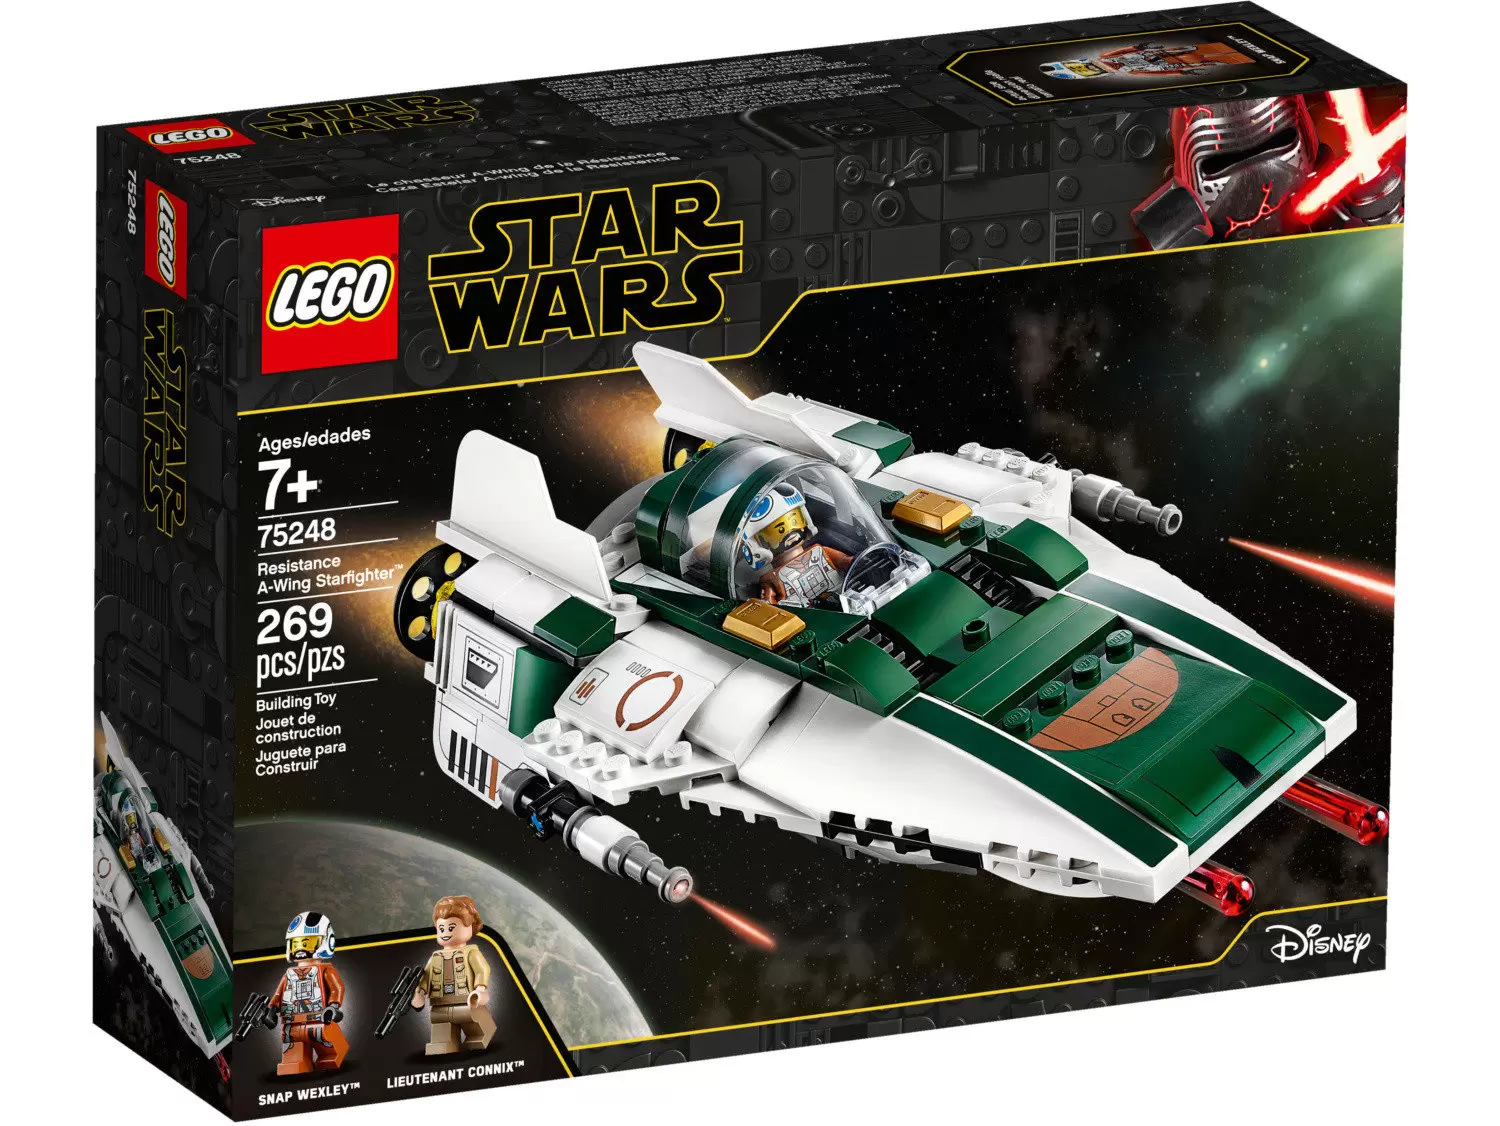 LEGO Star Wars - Resistance A-Wing Starfighter